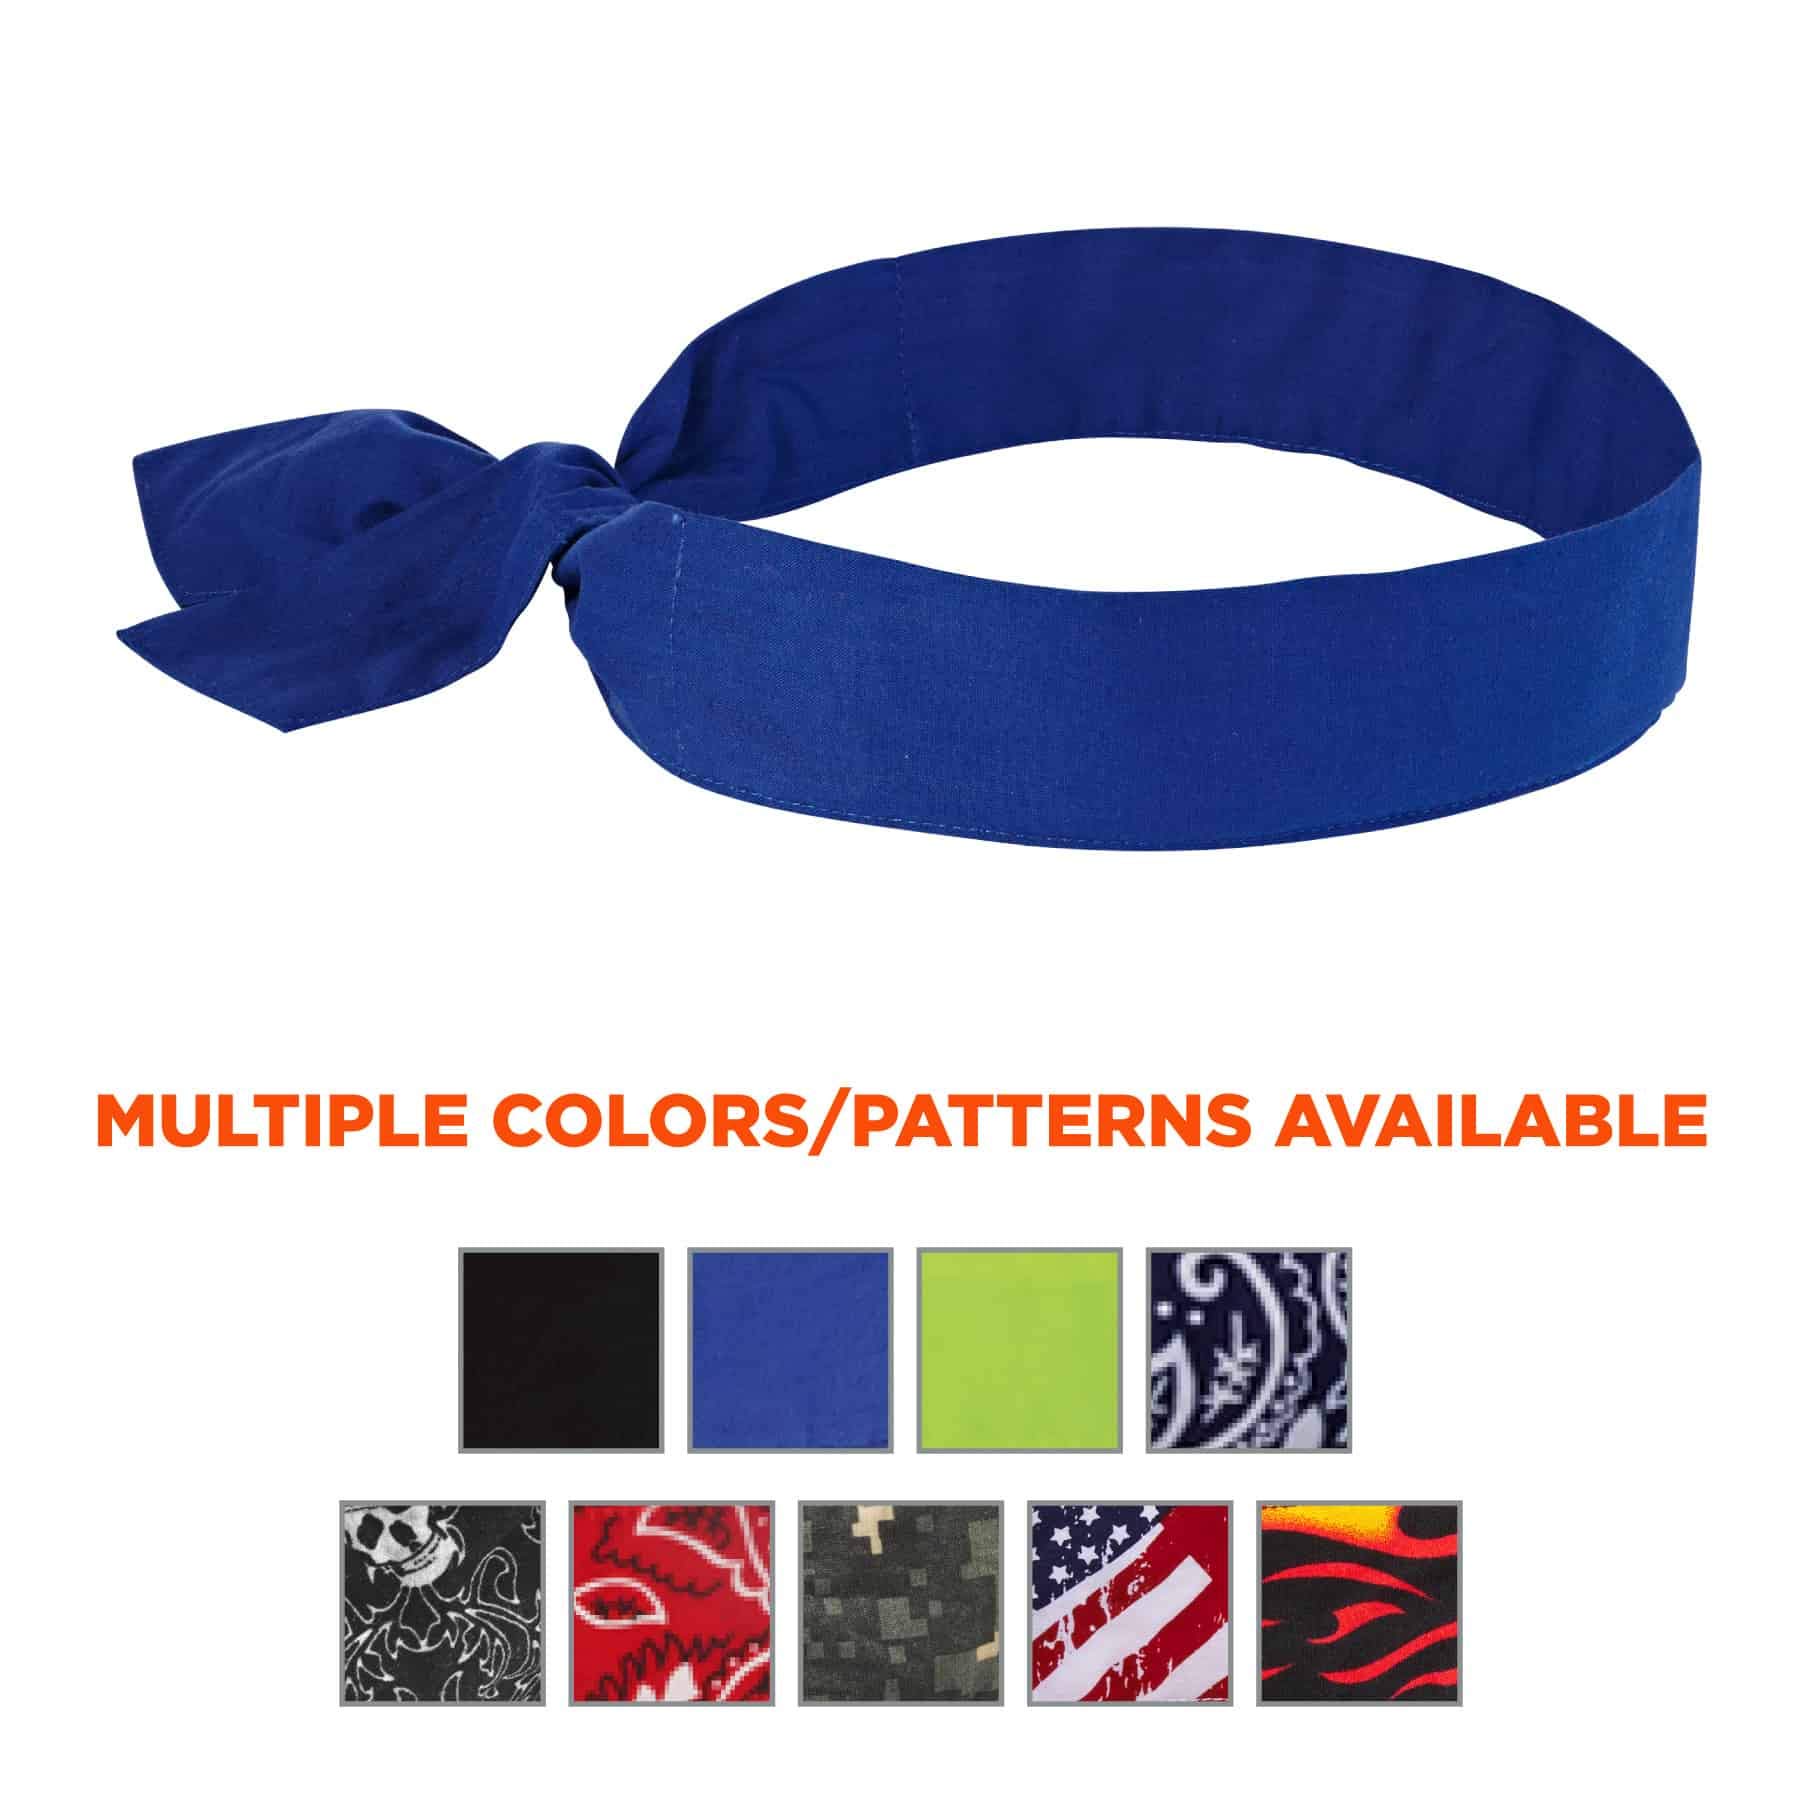 Ergodyne Chill Its 6700 Cooling Bandana, Evaporative Polymer Crystals for Cooling Relief, Tie for Adjustable Fit, Blue